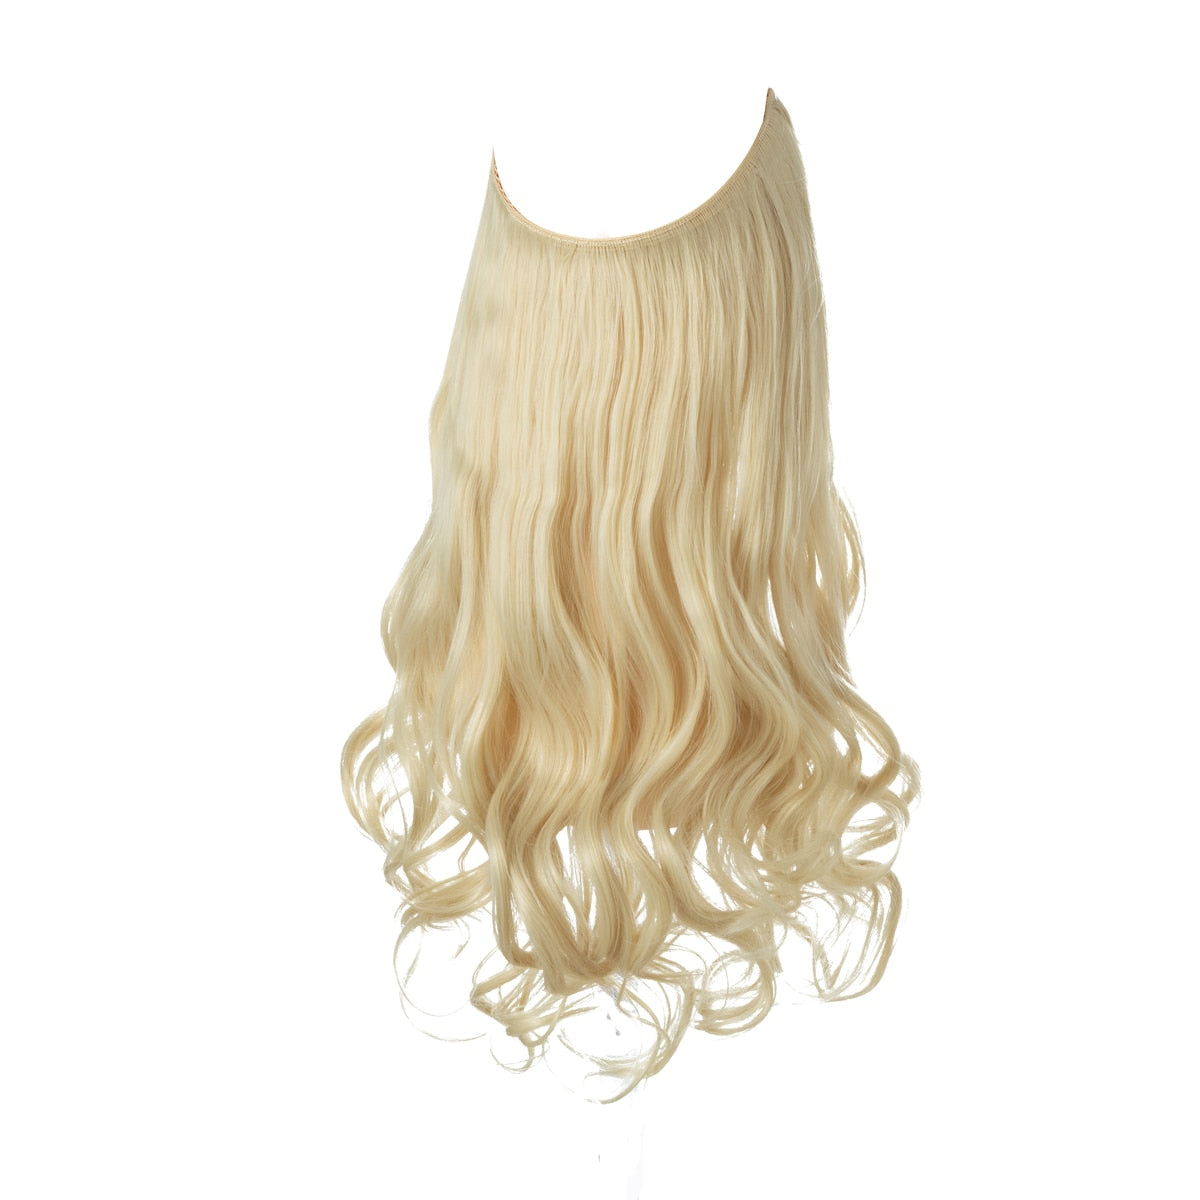 TEEK - Invisible Synth No Clip No Comb Wave Hair Extensions | Blonde Shades HAIR theteekdotcom Beach Blonde 14inches 20-22 days